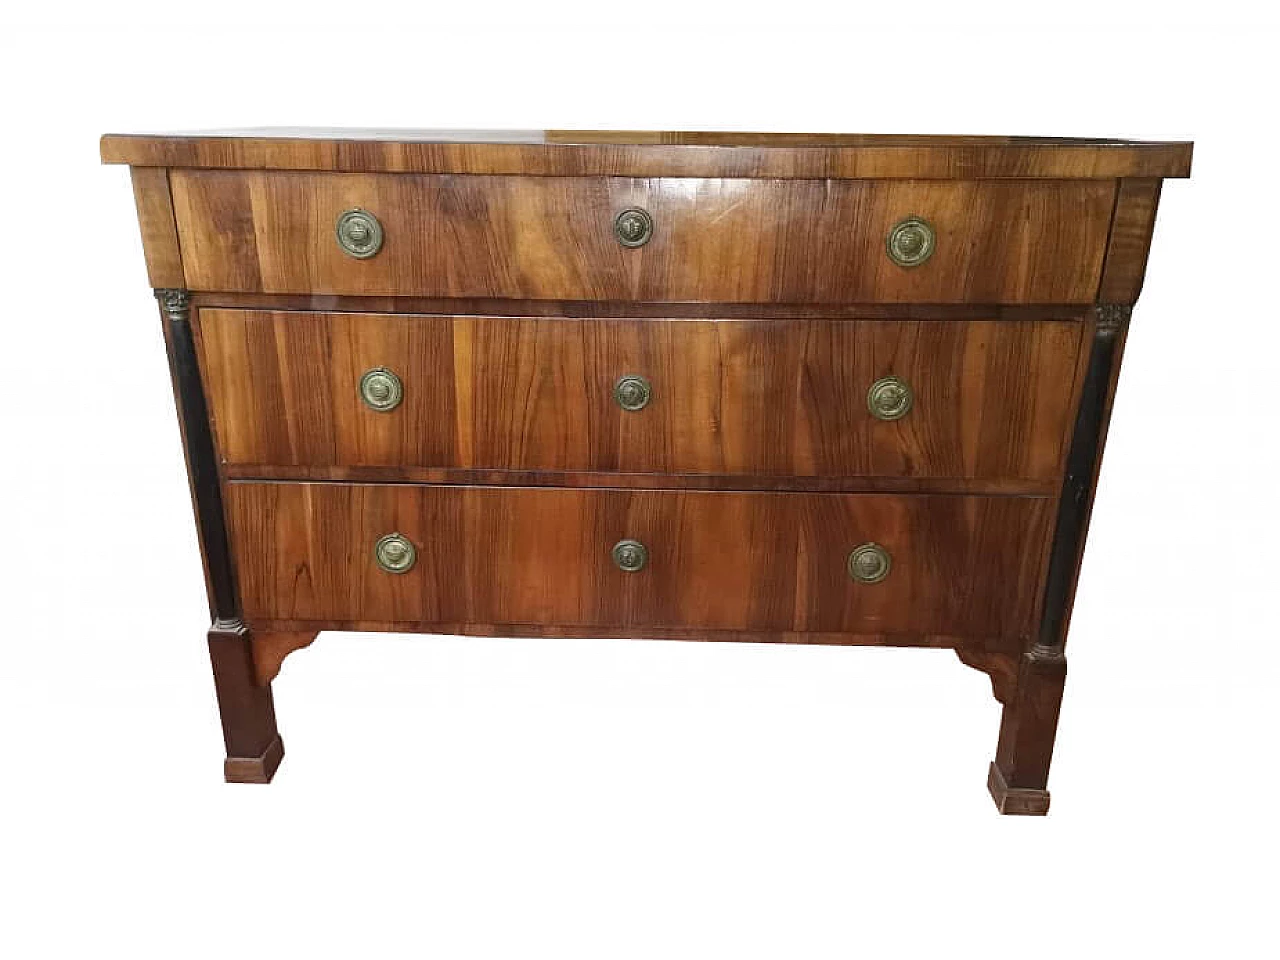 Empire chest of drawers in walnut and metal, 19th century 1322913